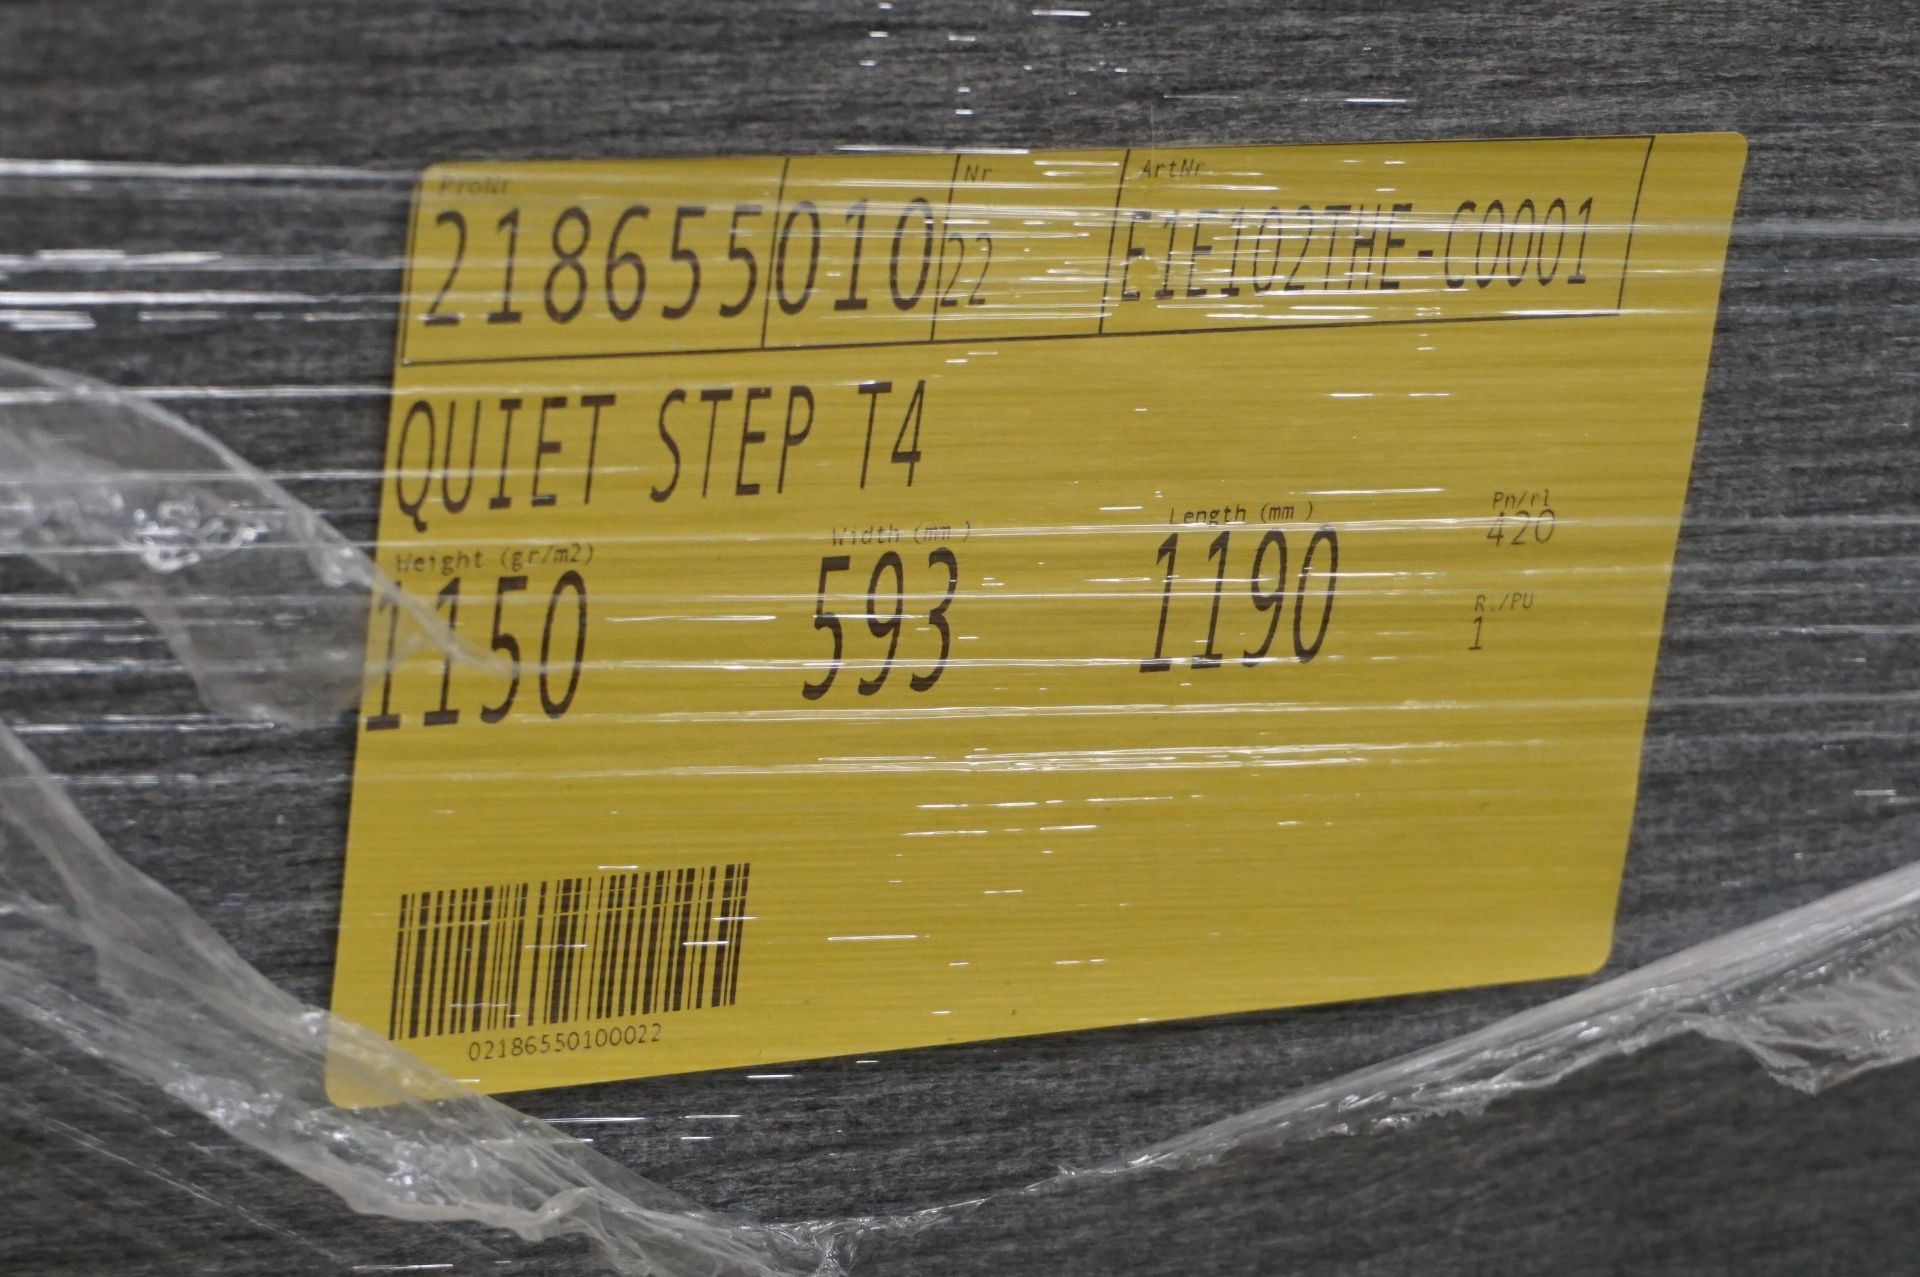 Quiet, Step T4 floor insulation on two pallets, approx. 700 sheets, 1190 x 593mm - Image 10 of 12